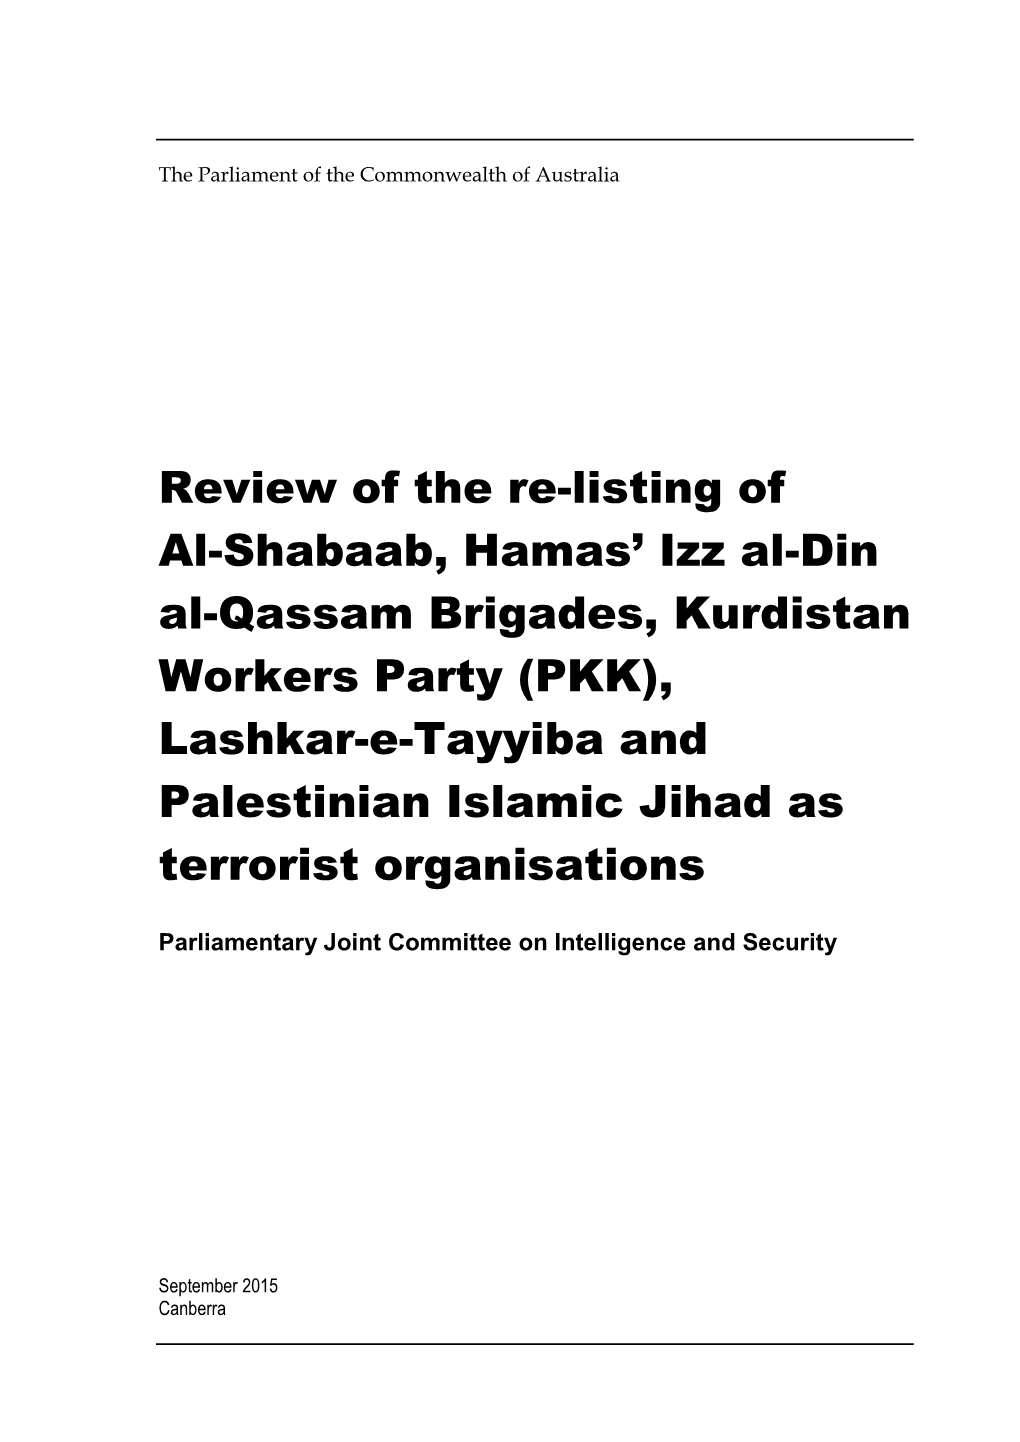 Review of the Re-Listing of Al-Shabaab